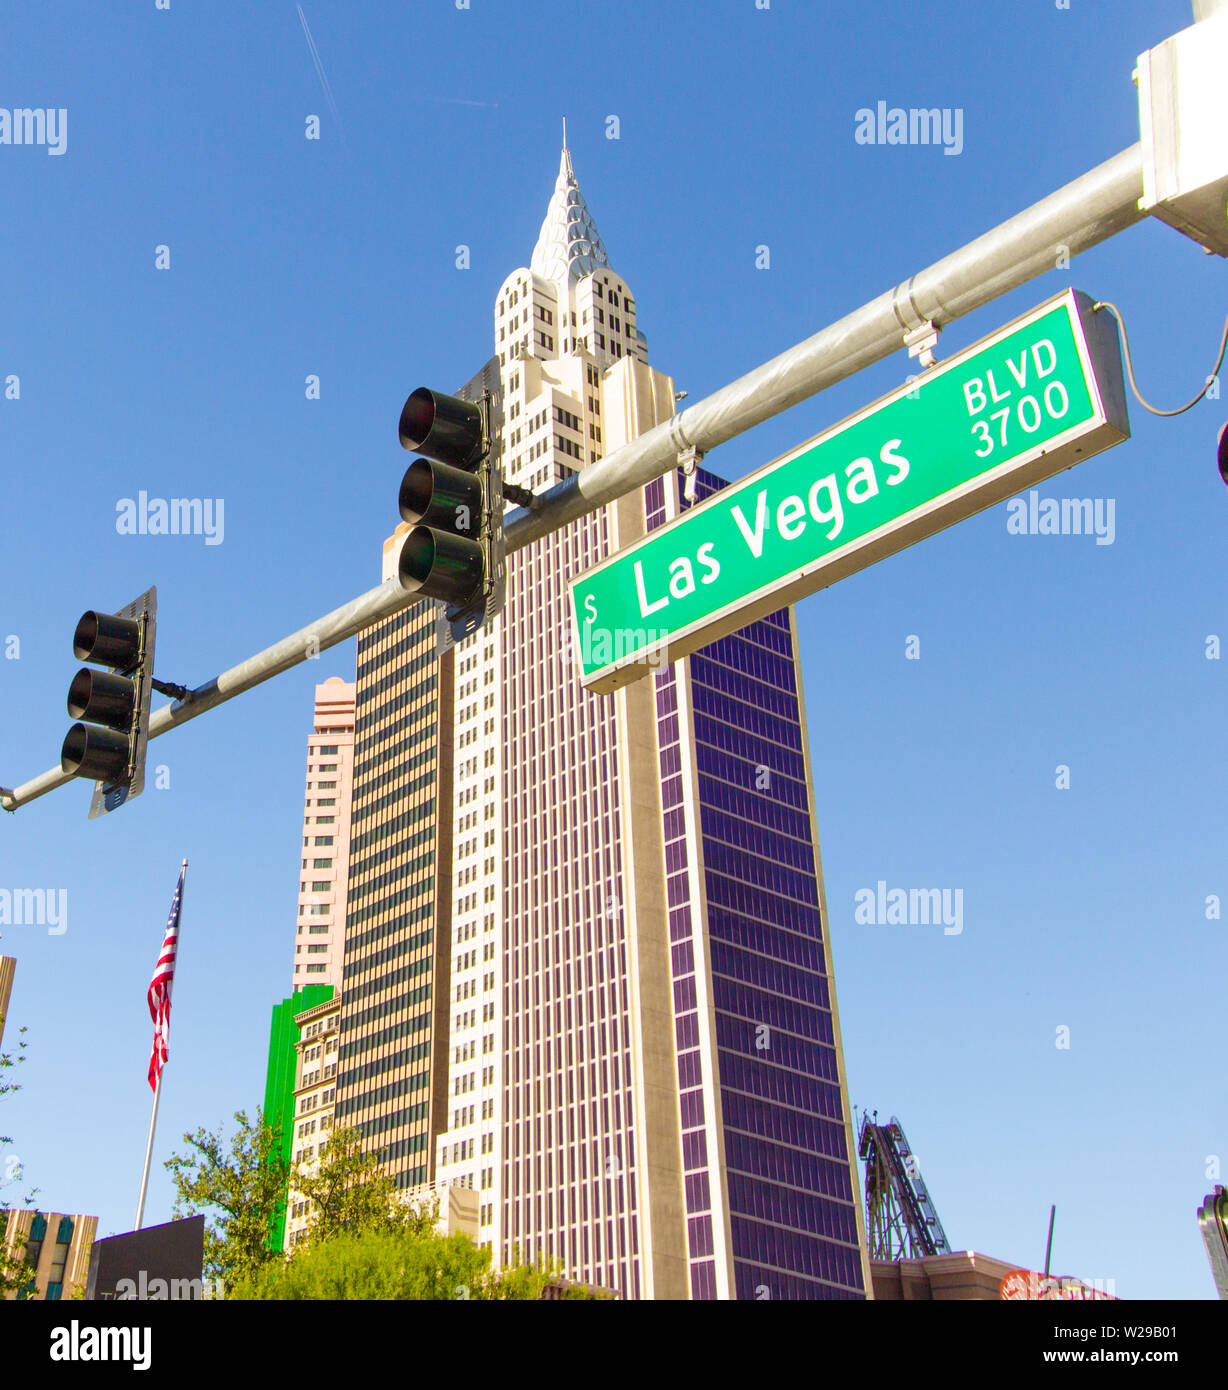 Vertical street scene of the Las Vegas Boulevard with street light and sign. Stock Photo